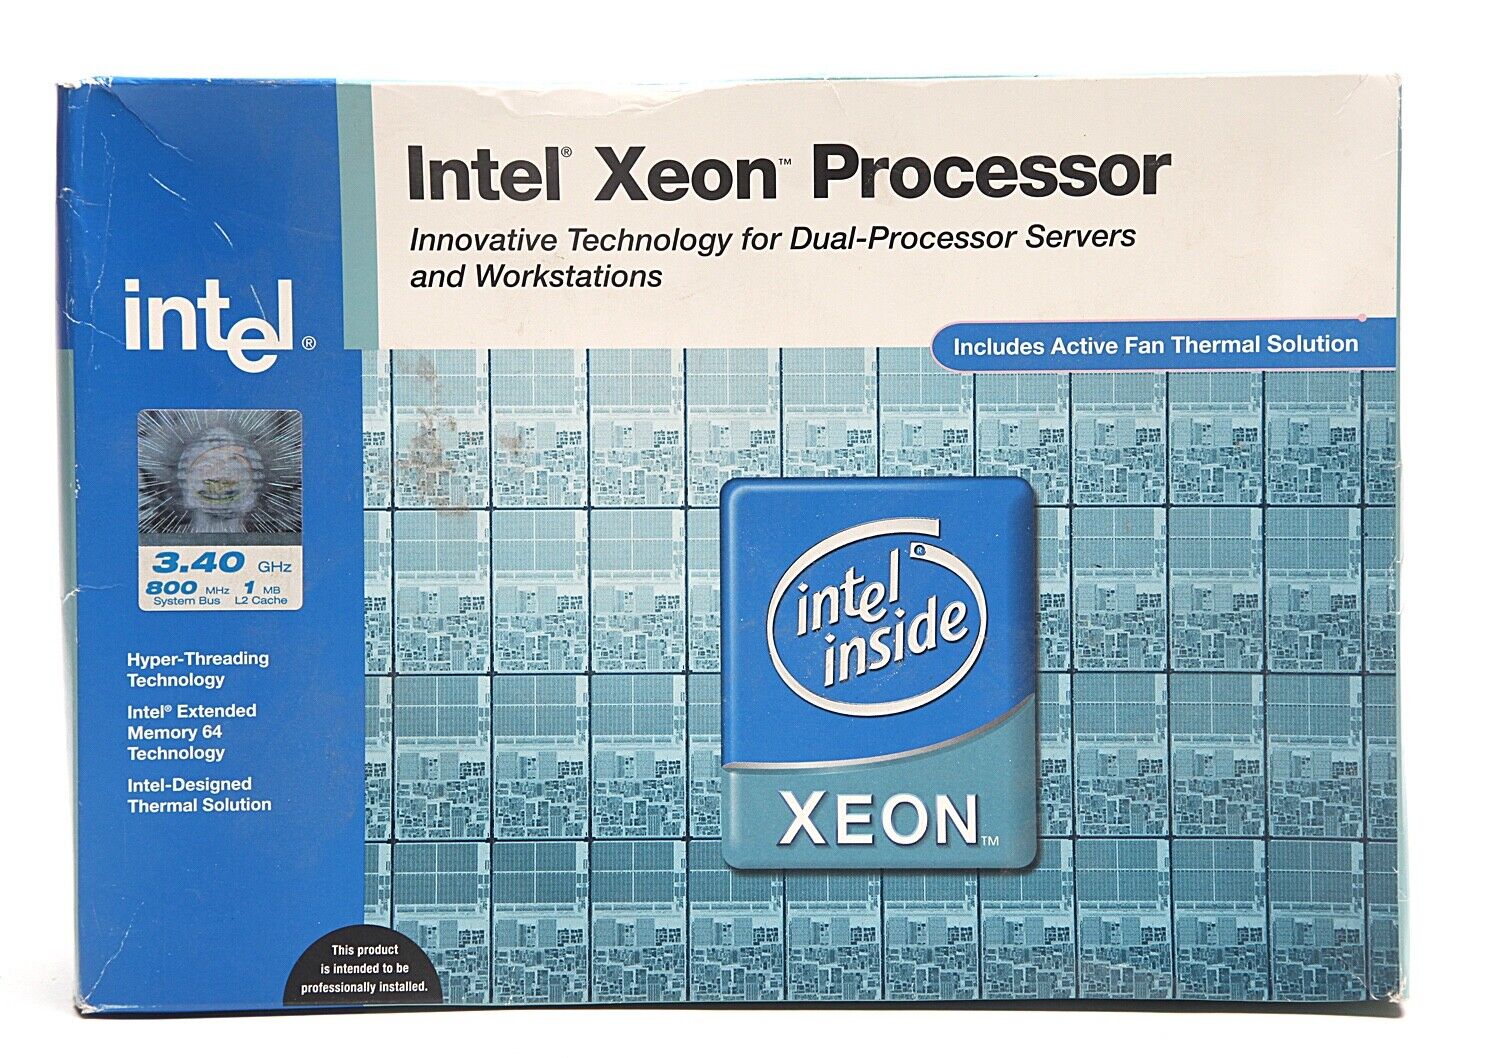 INTEL XEON 3.4 GHz Processor Unopened, Never Used